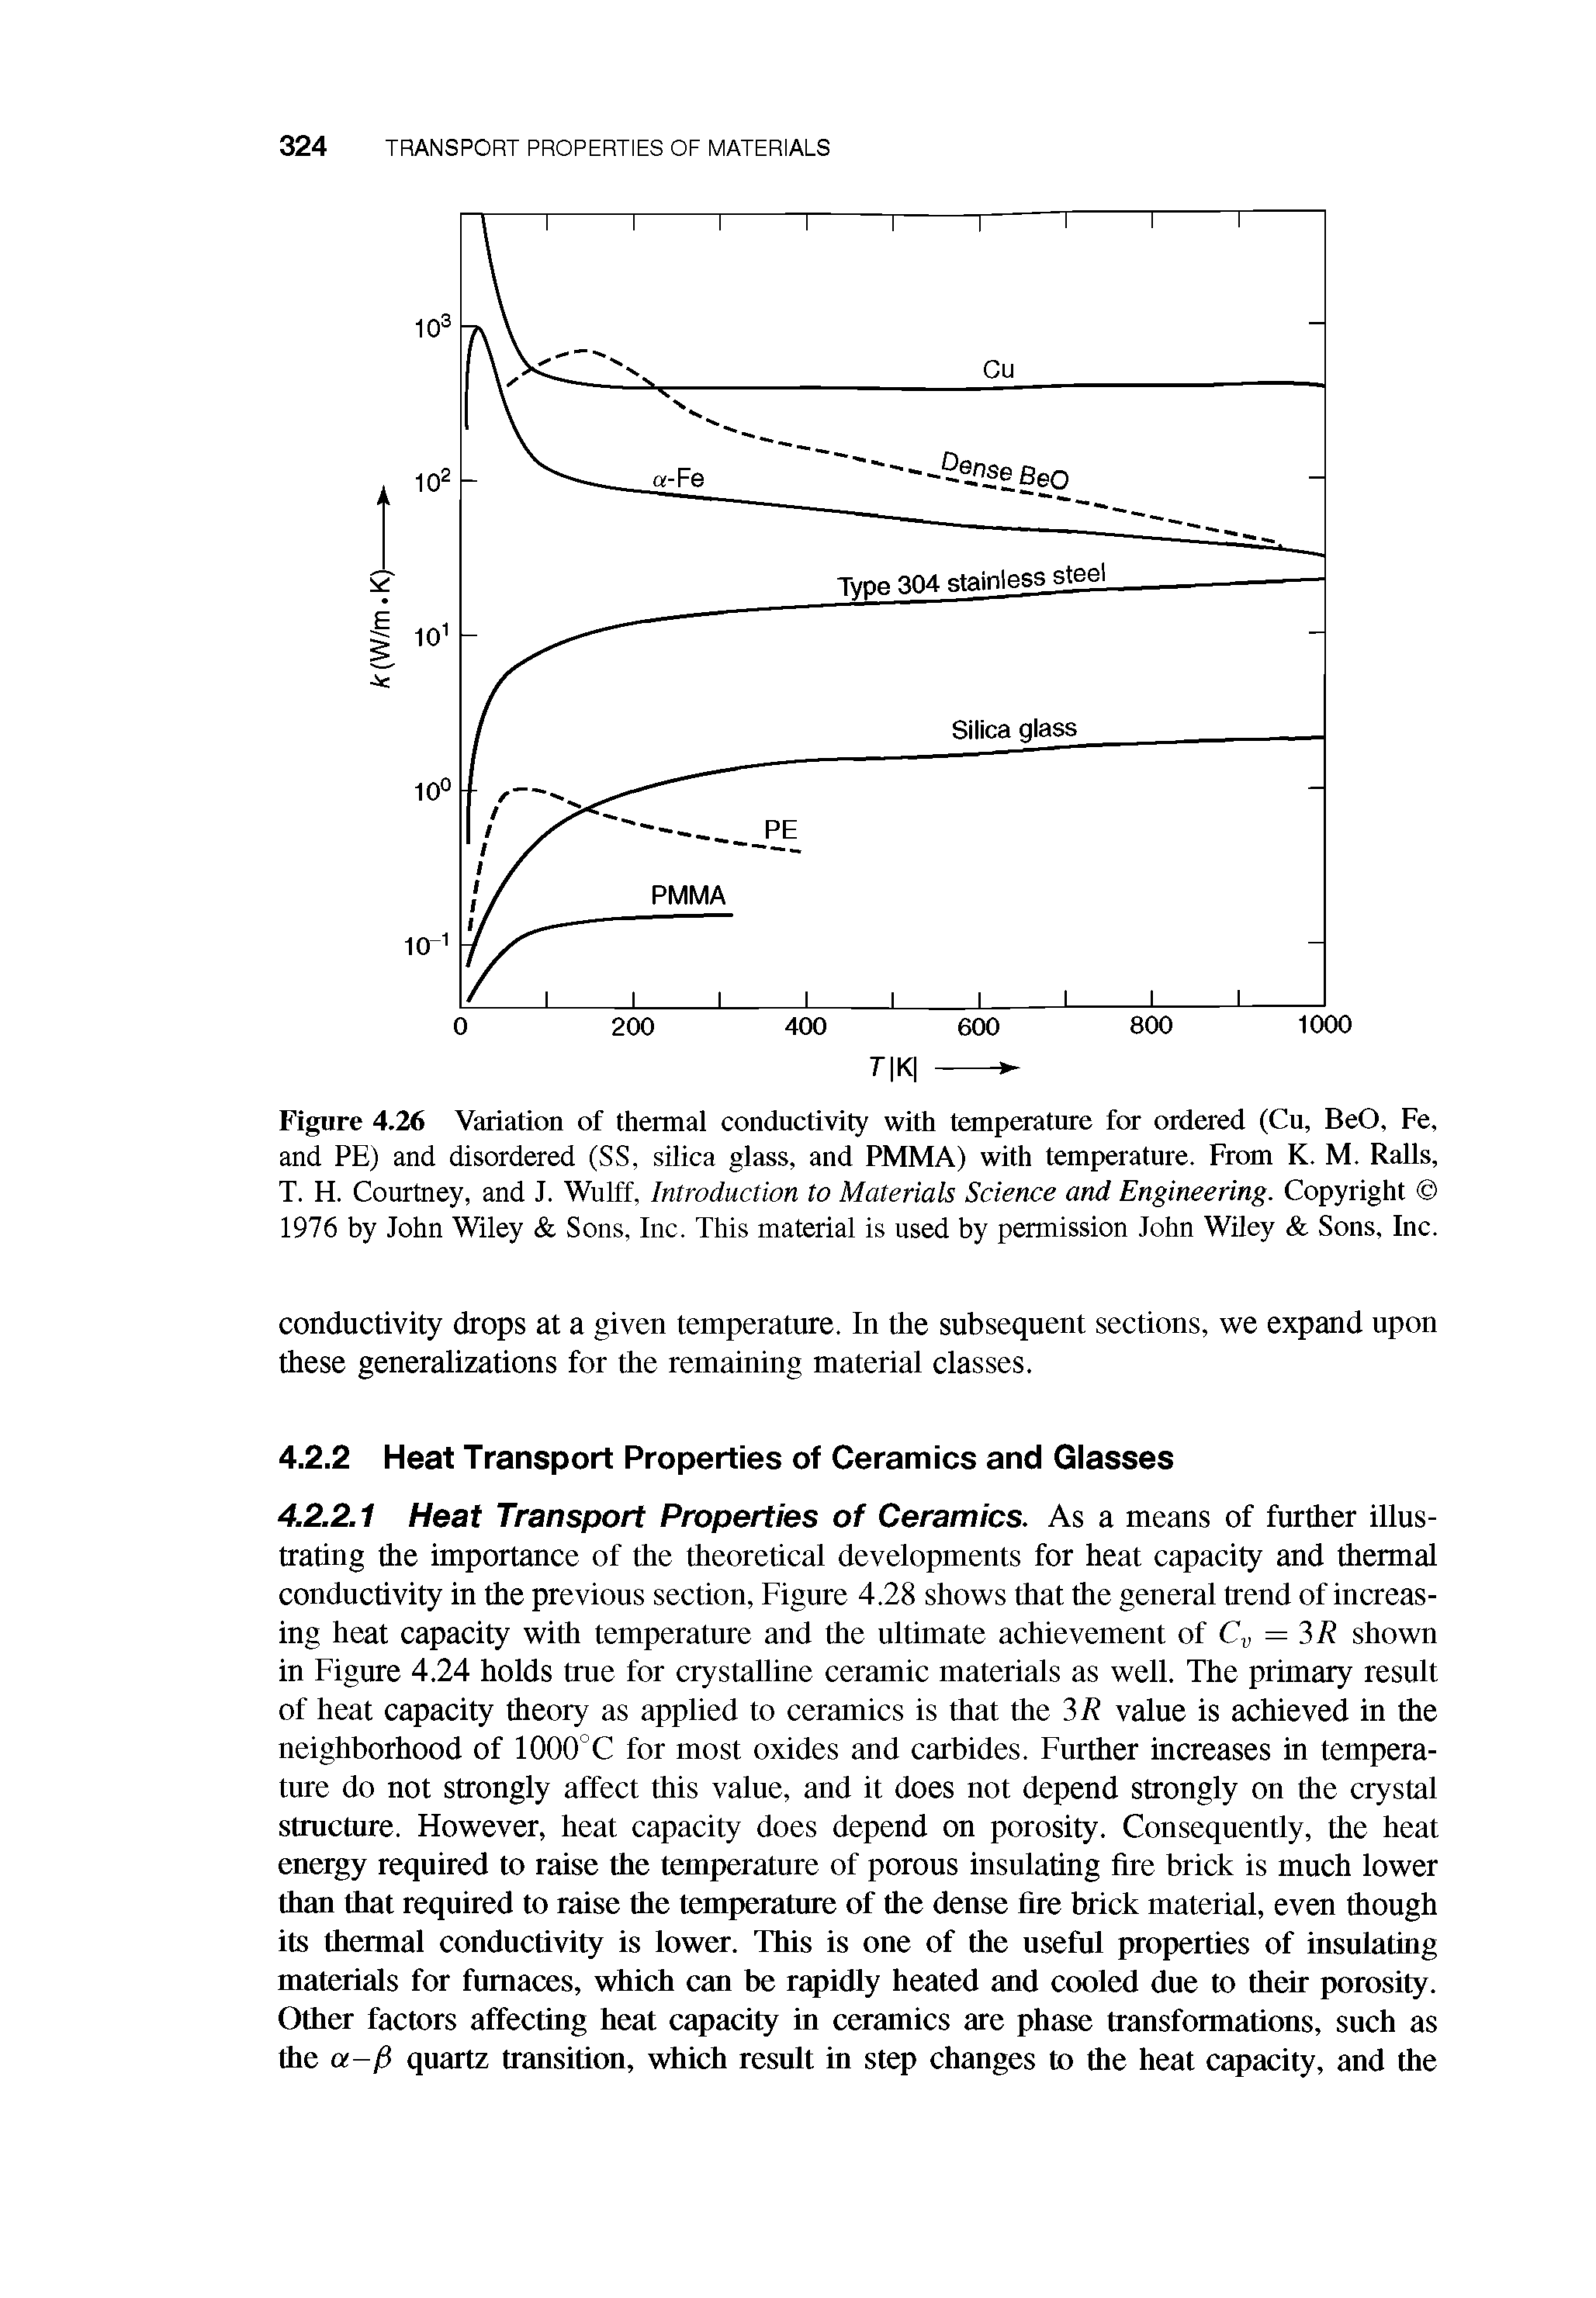 Figure 4.26 Variation of thermal conductivity with temperature for ordered (Cu, BeO, Fe, and PE) and disordered (SS, silica glass, and PMMA) with temperature. From K. M. Ralls, T. H. Courtney, and J. Wulff, Introduction to Materials Science and Engineering. Copyright 1976 by John Wiley Sons, Inc. This material is used by permission John Wiley Sons, Inc.